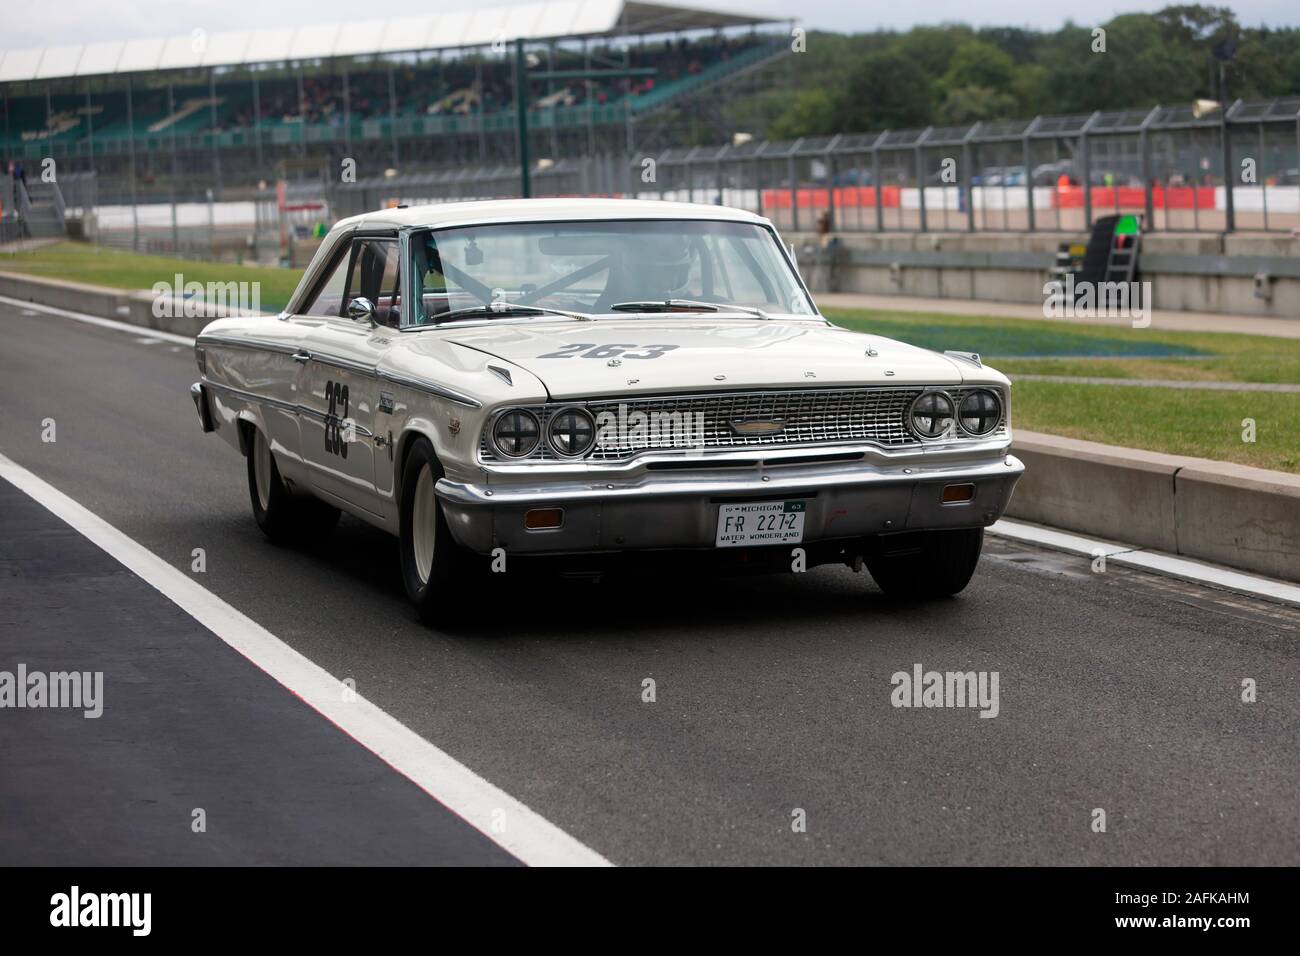 A 1963, White, Ford Galaxie, exiting the pit lane during the Transatlantic Trophy for Pre '66 Touring Cars, at the 2019 Silverstone Classic Stock Photo